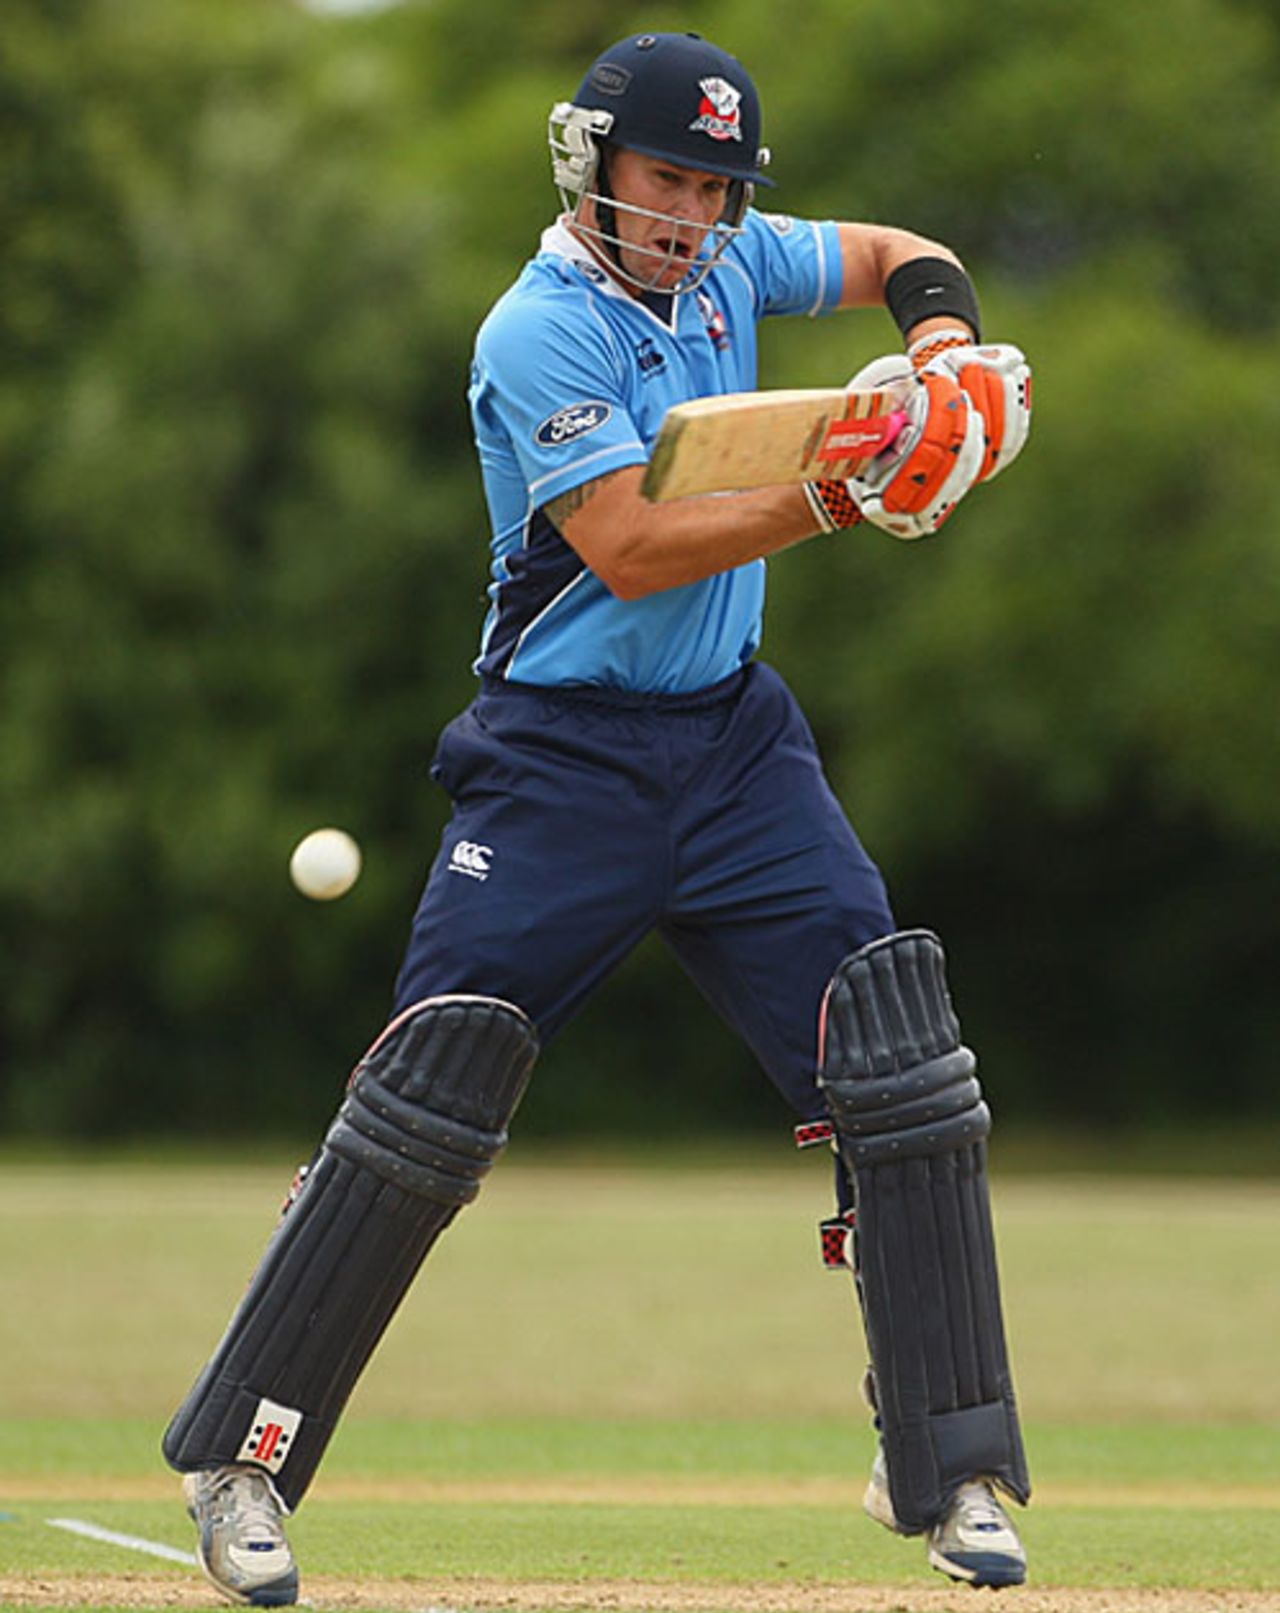 Reece Young plays the square cut during his 40, Auckland v Otago, New Zealand Cricket One Day Competition, Auckland, December 17, 2009